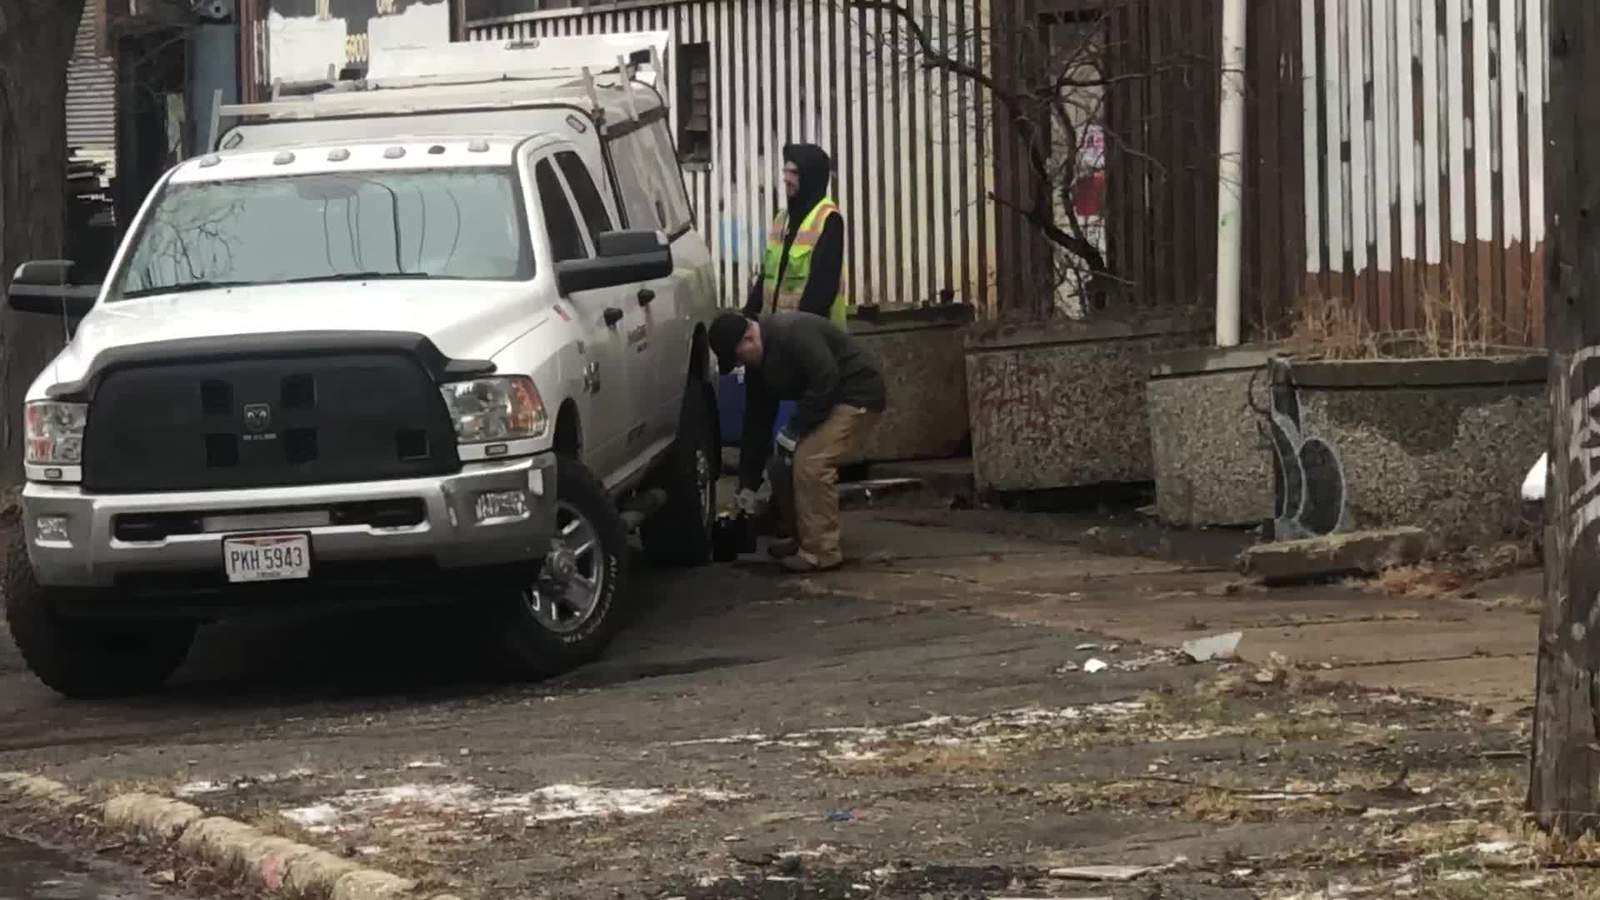 New video shows officials removing samples of potentially hazardous liquid from Detroit building